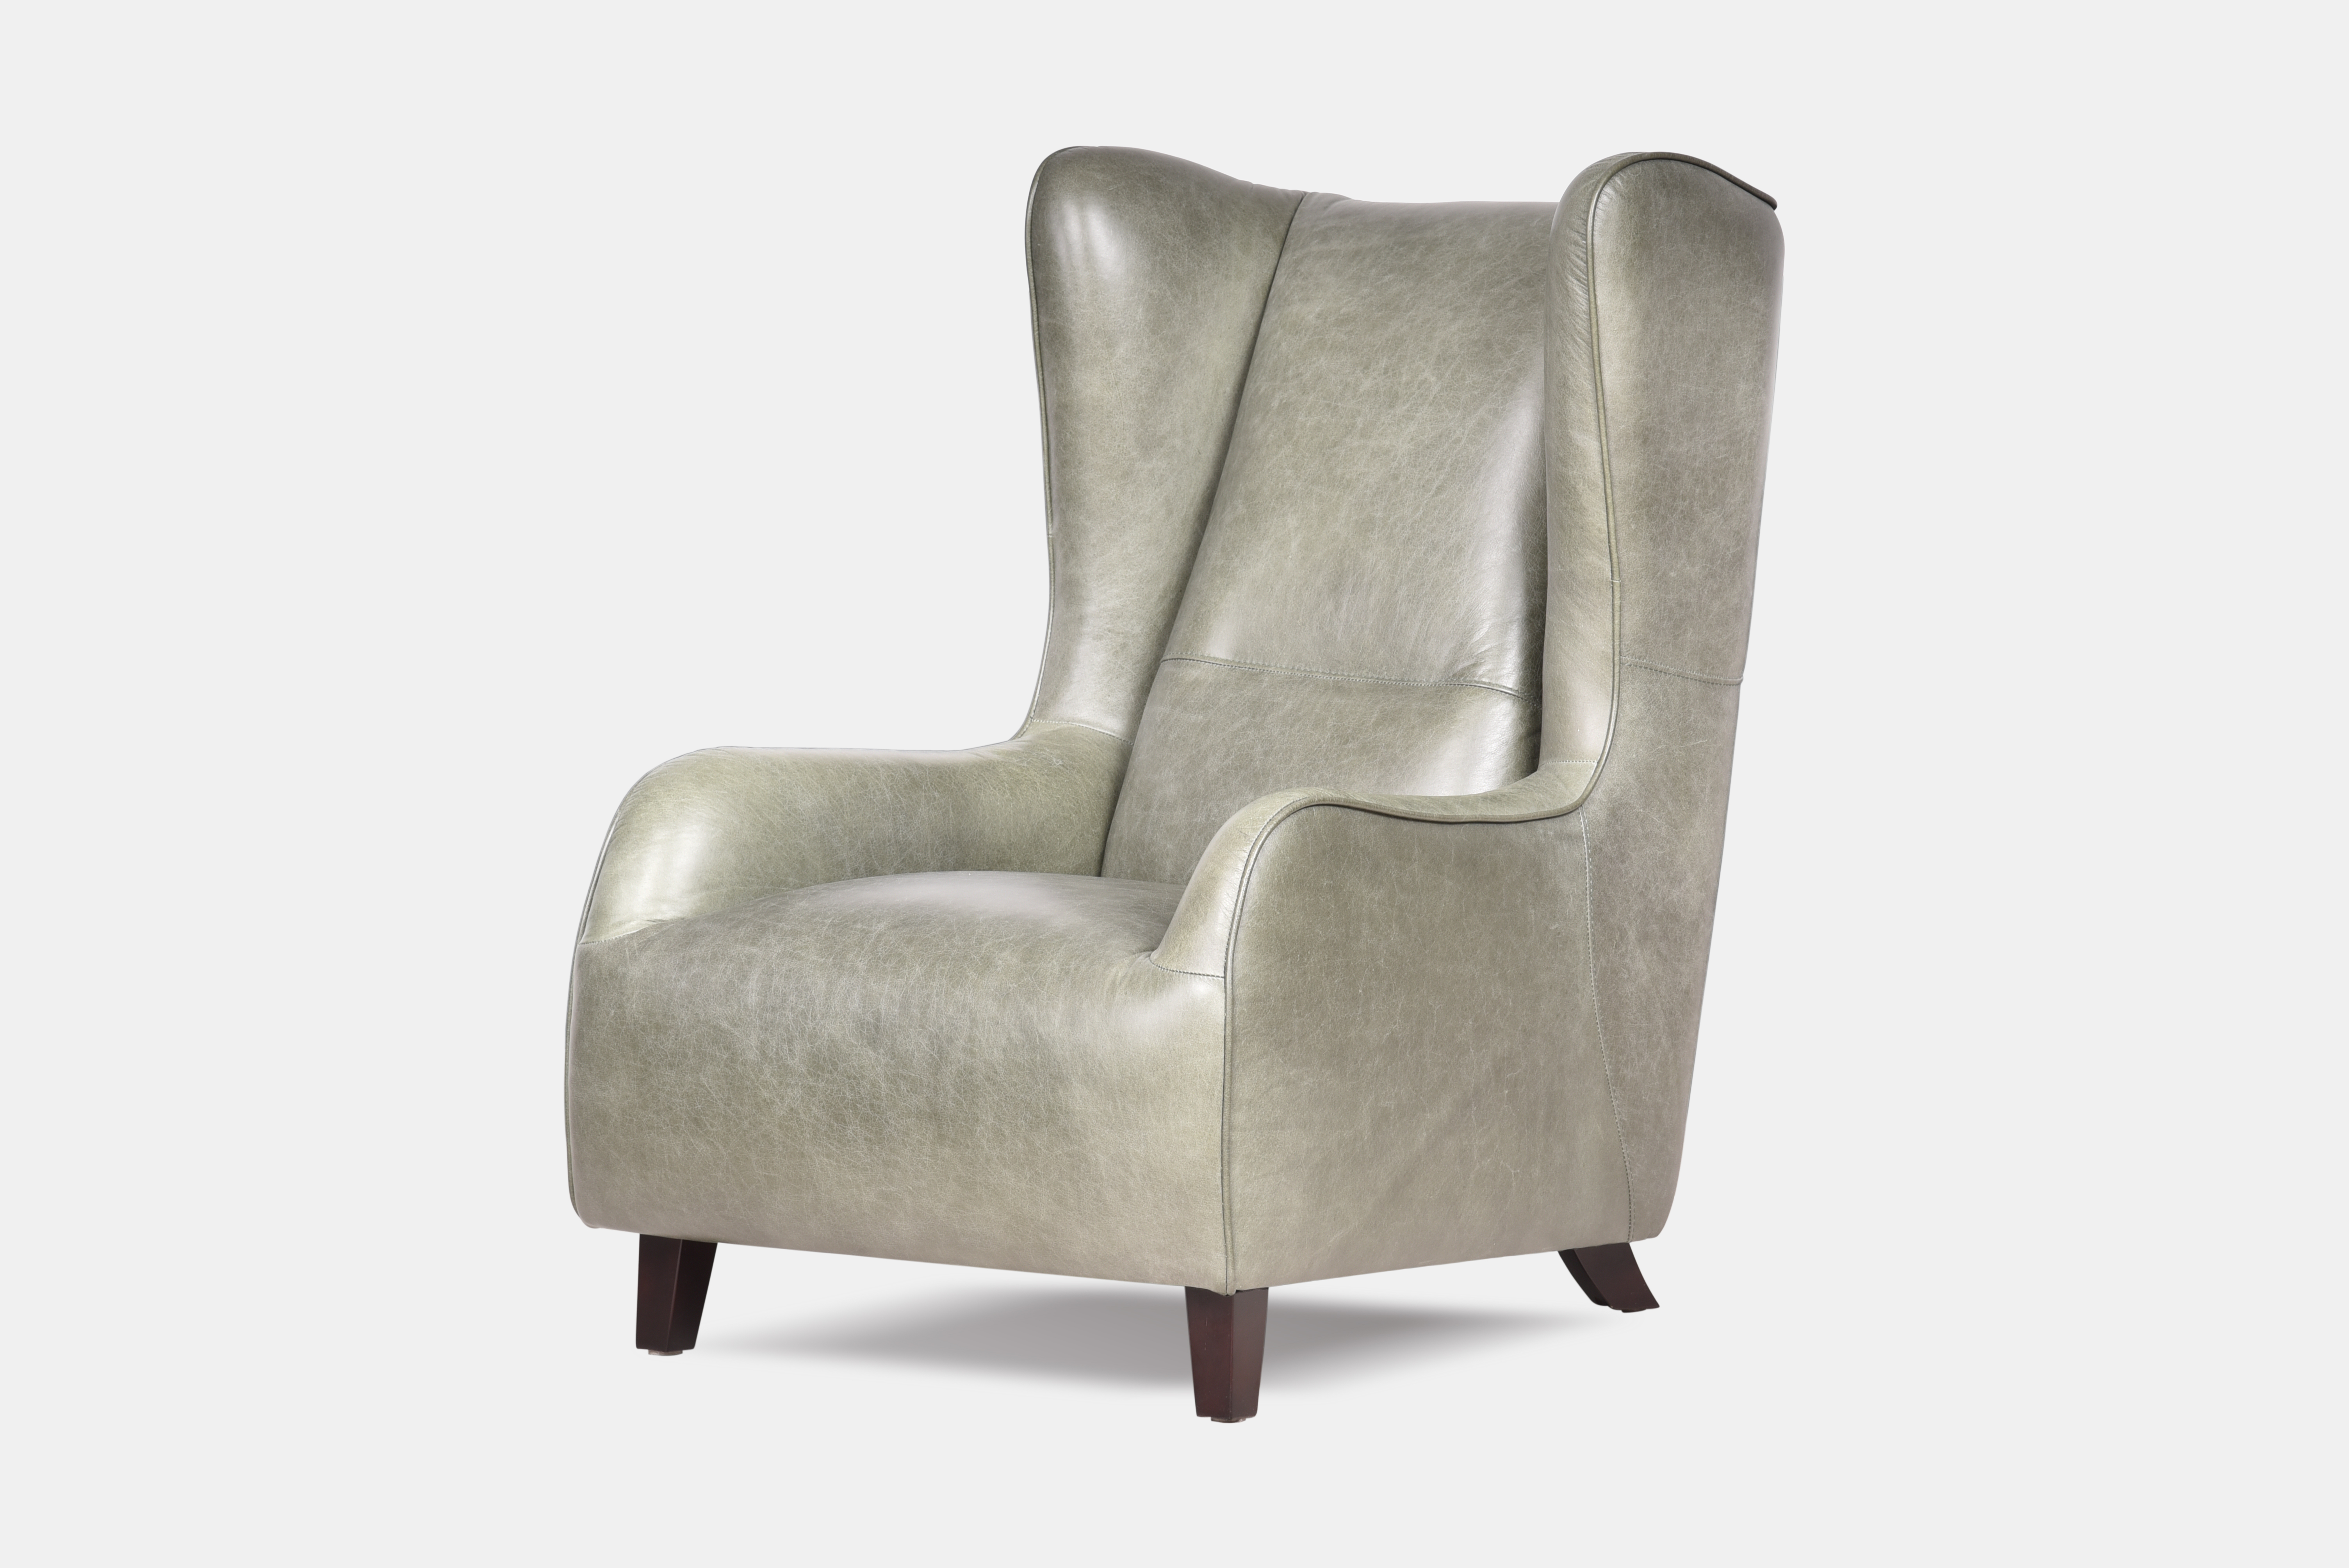 Patrick wing chair